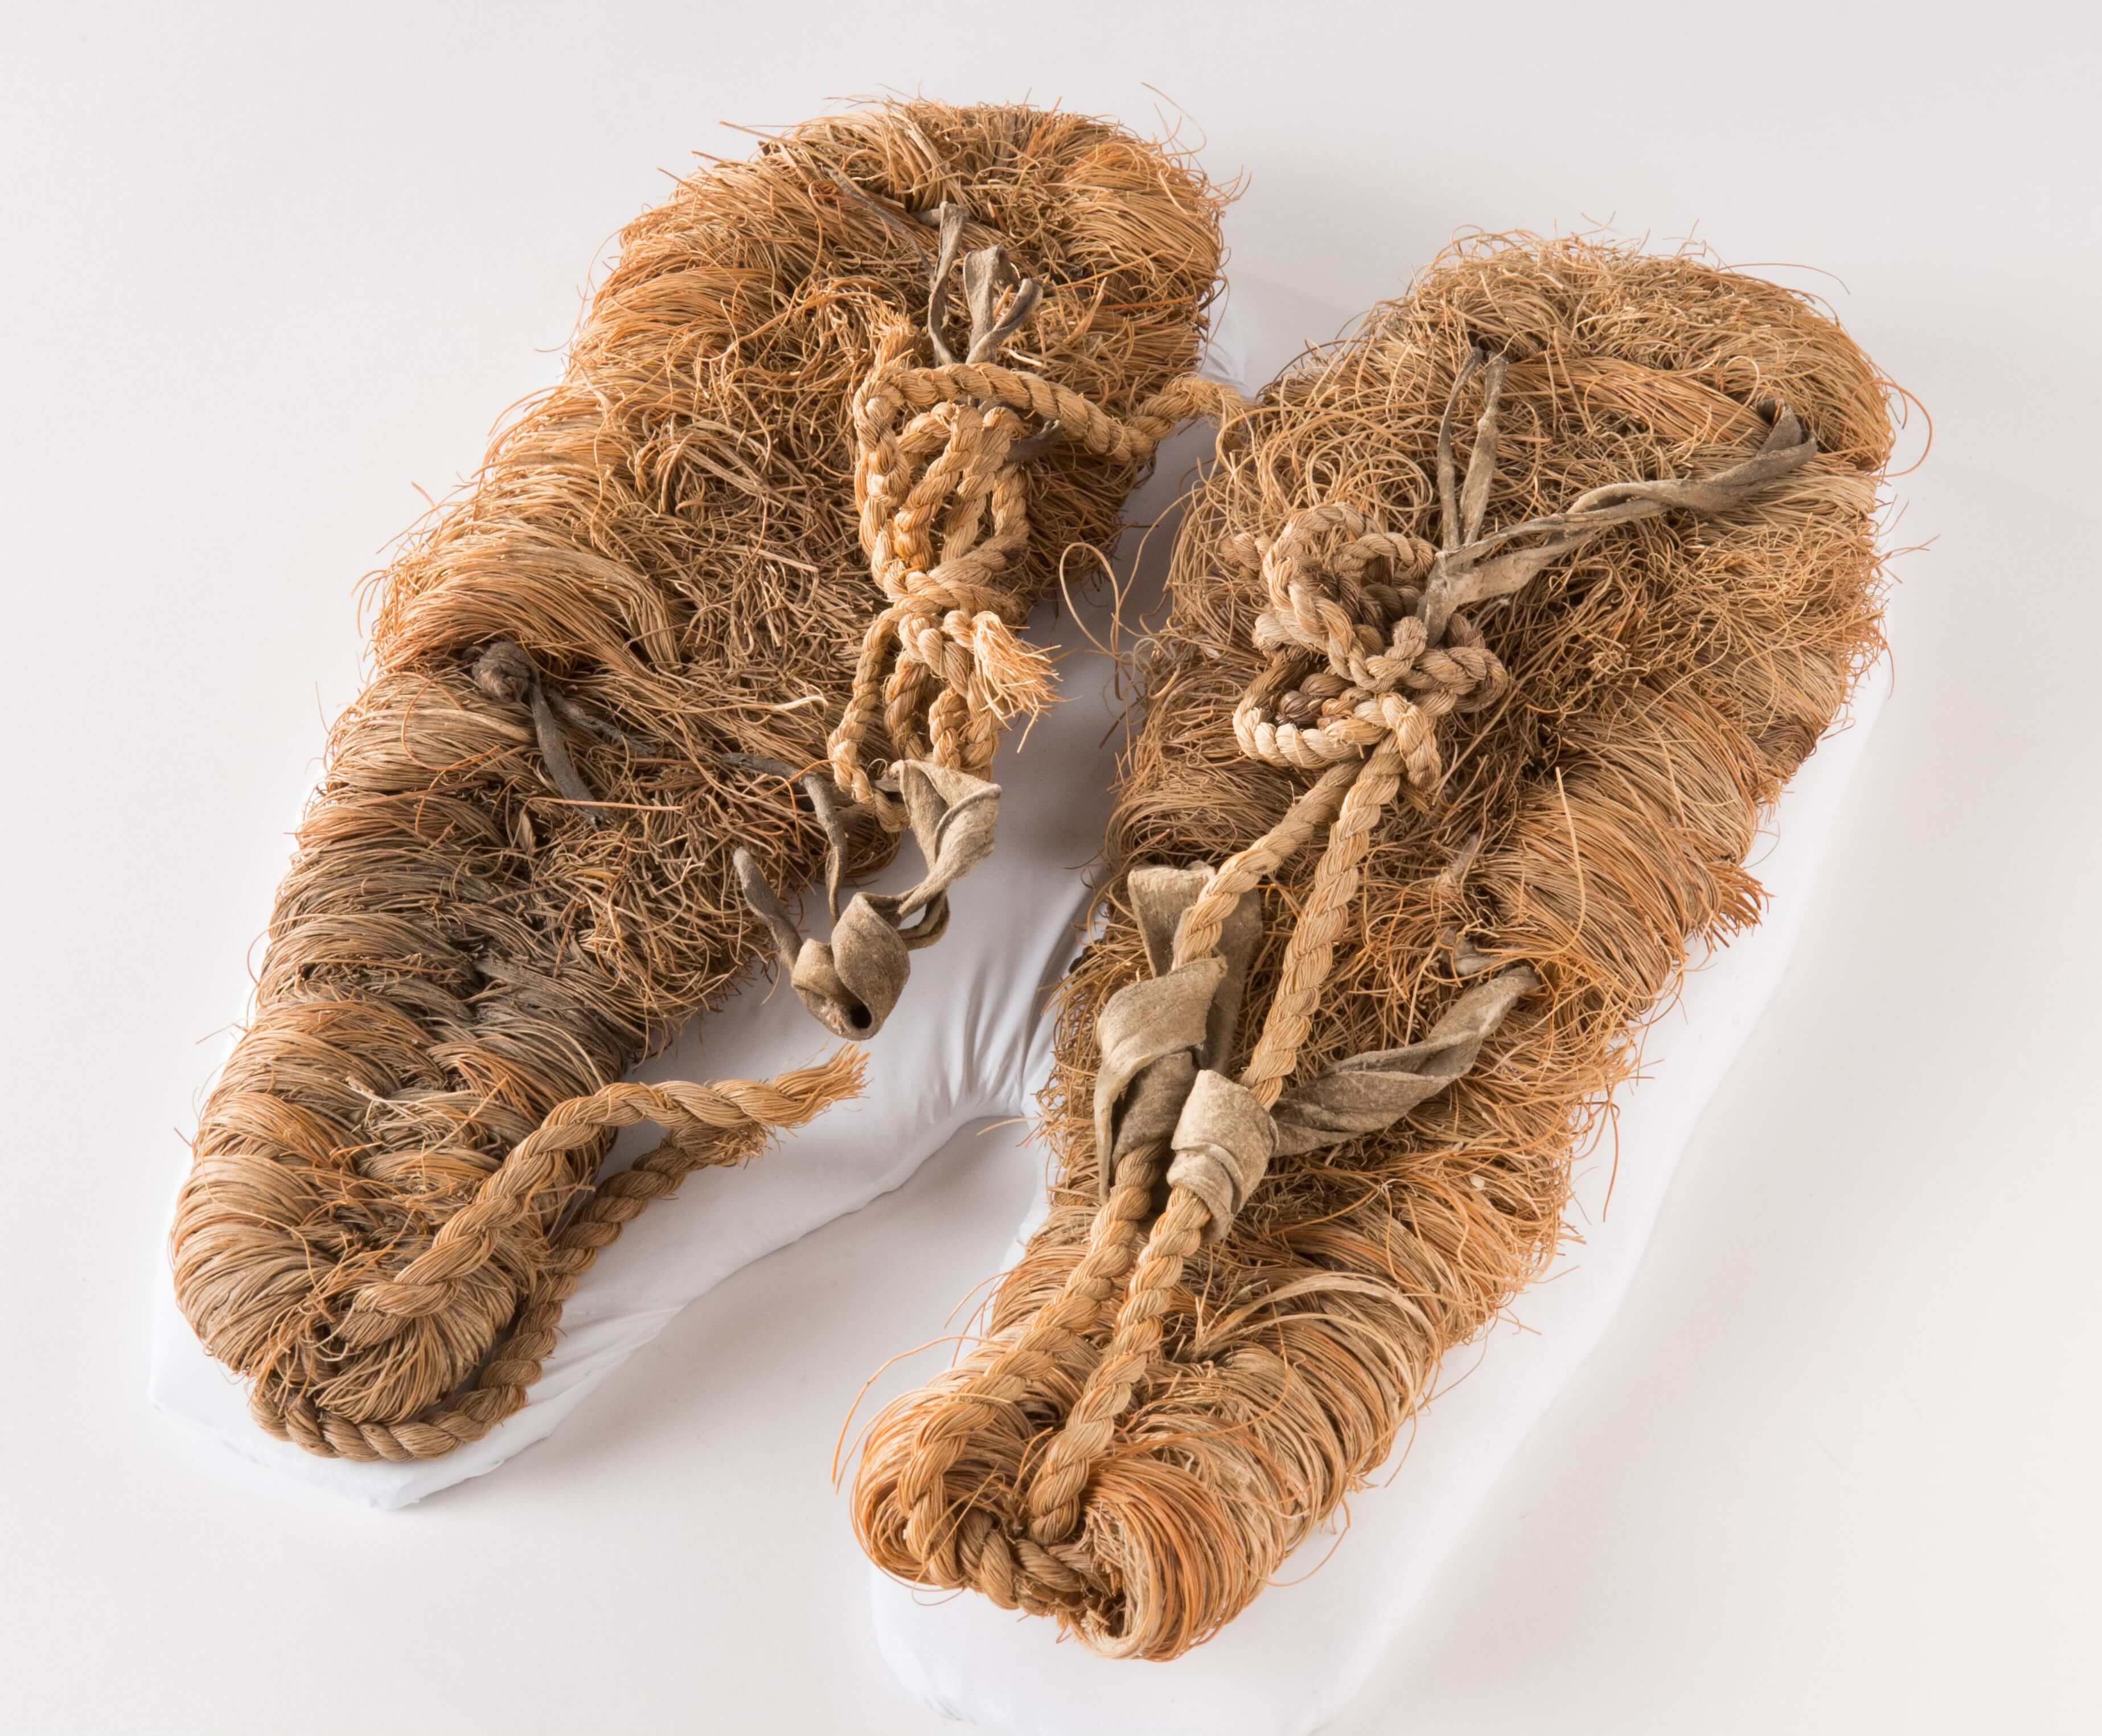 Traditional Cahuilla sandals, made of yucca fiber with leather ties.